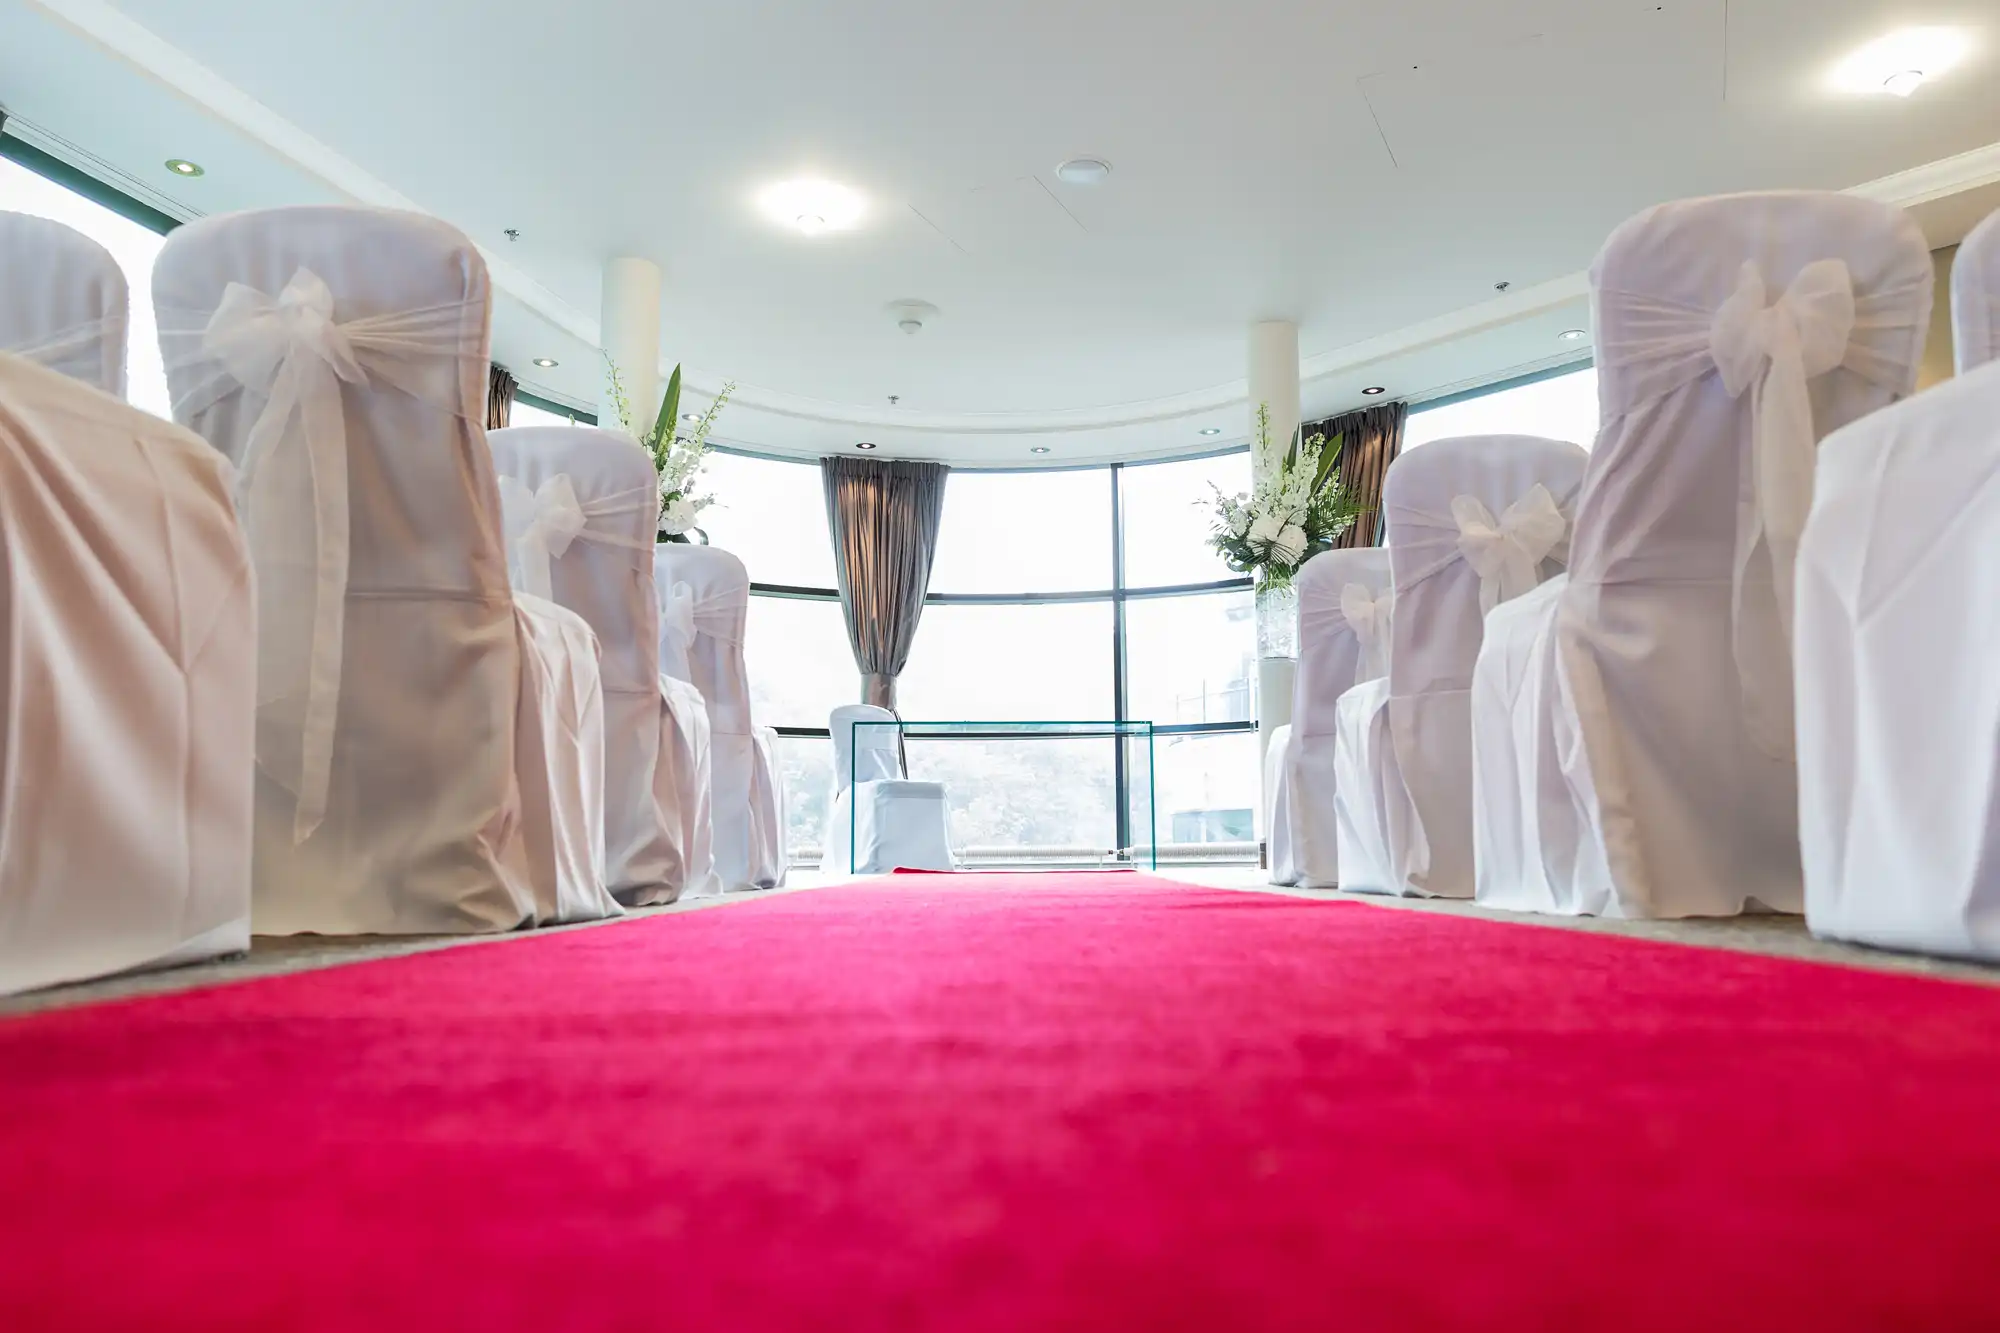 Low-angle view of a red carpet aisle in a wedding venue with rows of white chair covers and decorative bows.